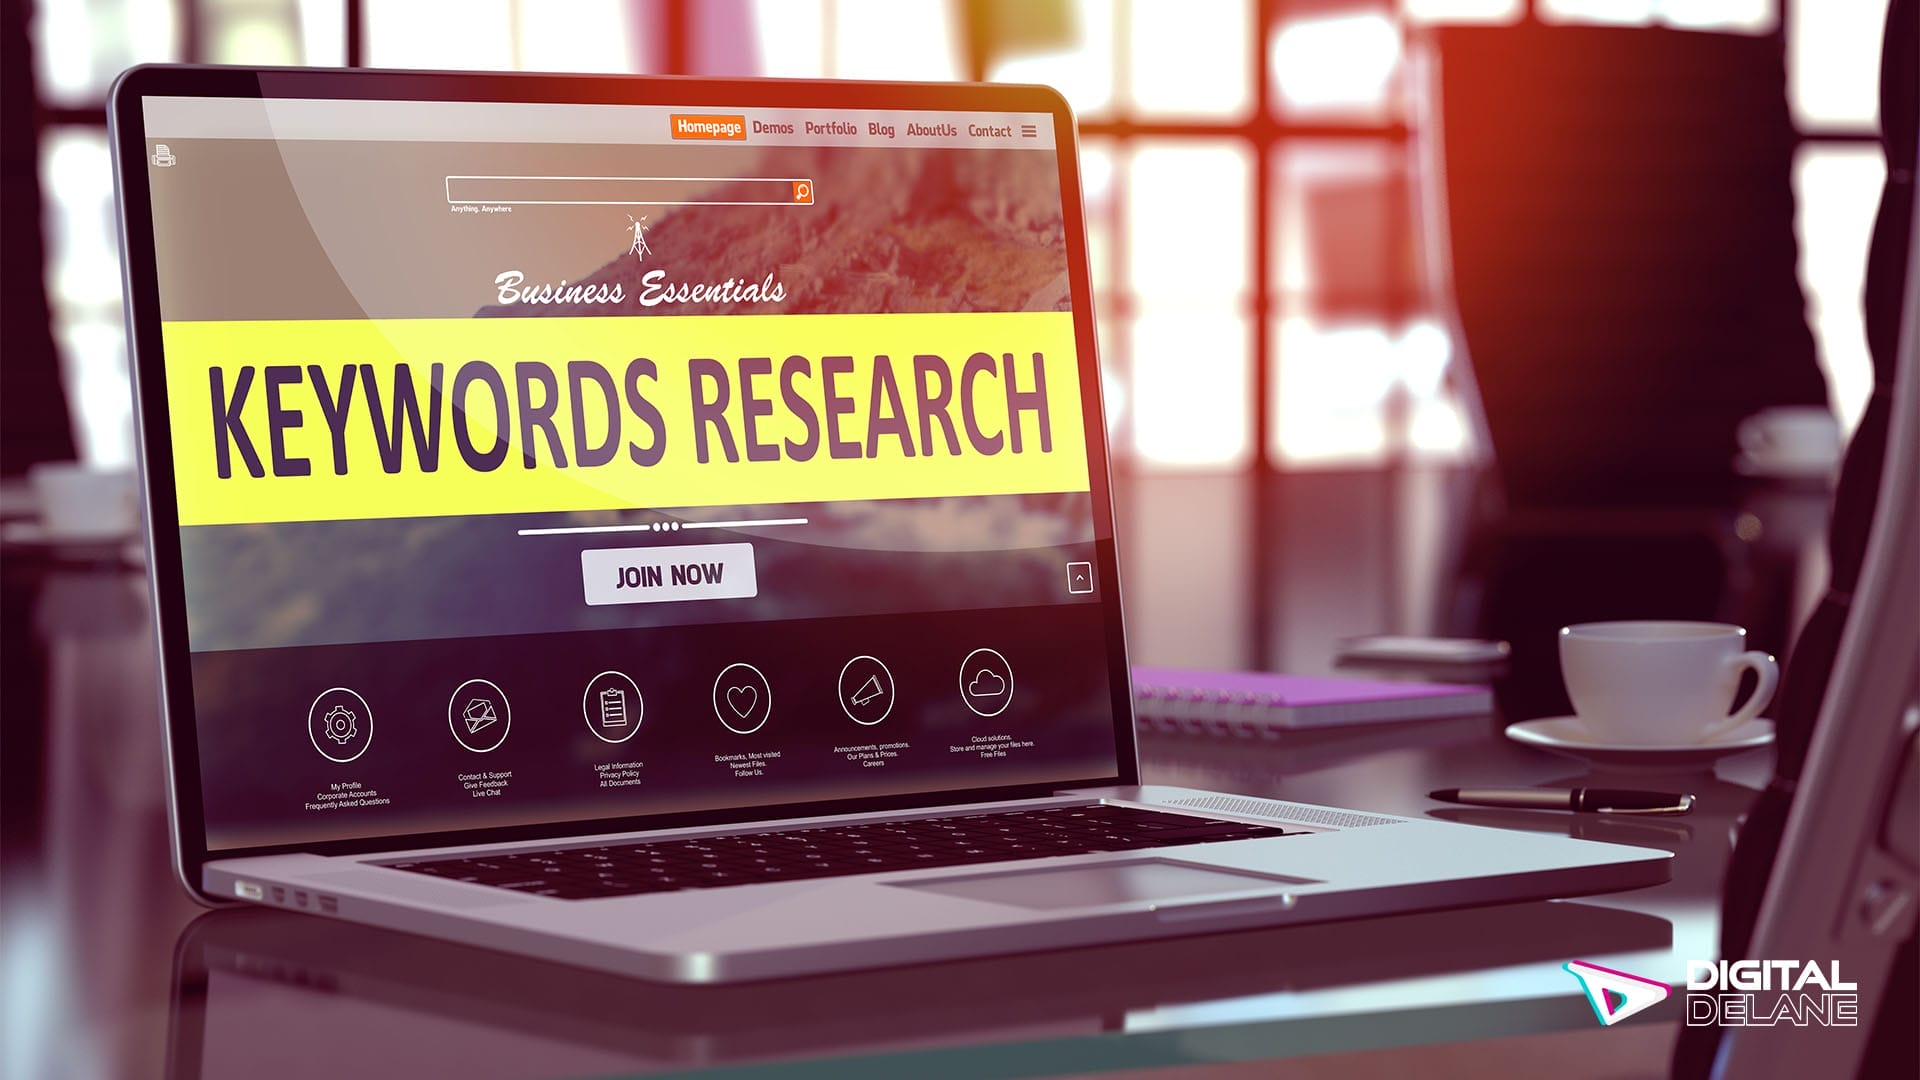 Tips for conducting keyword research